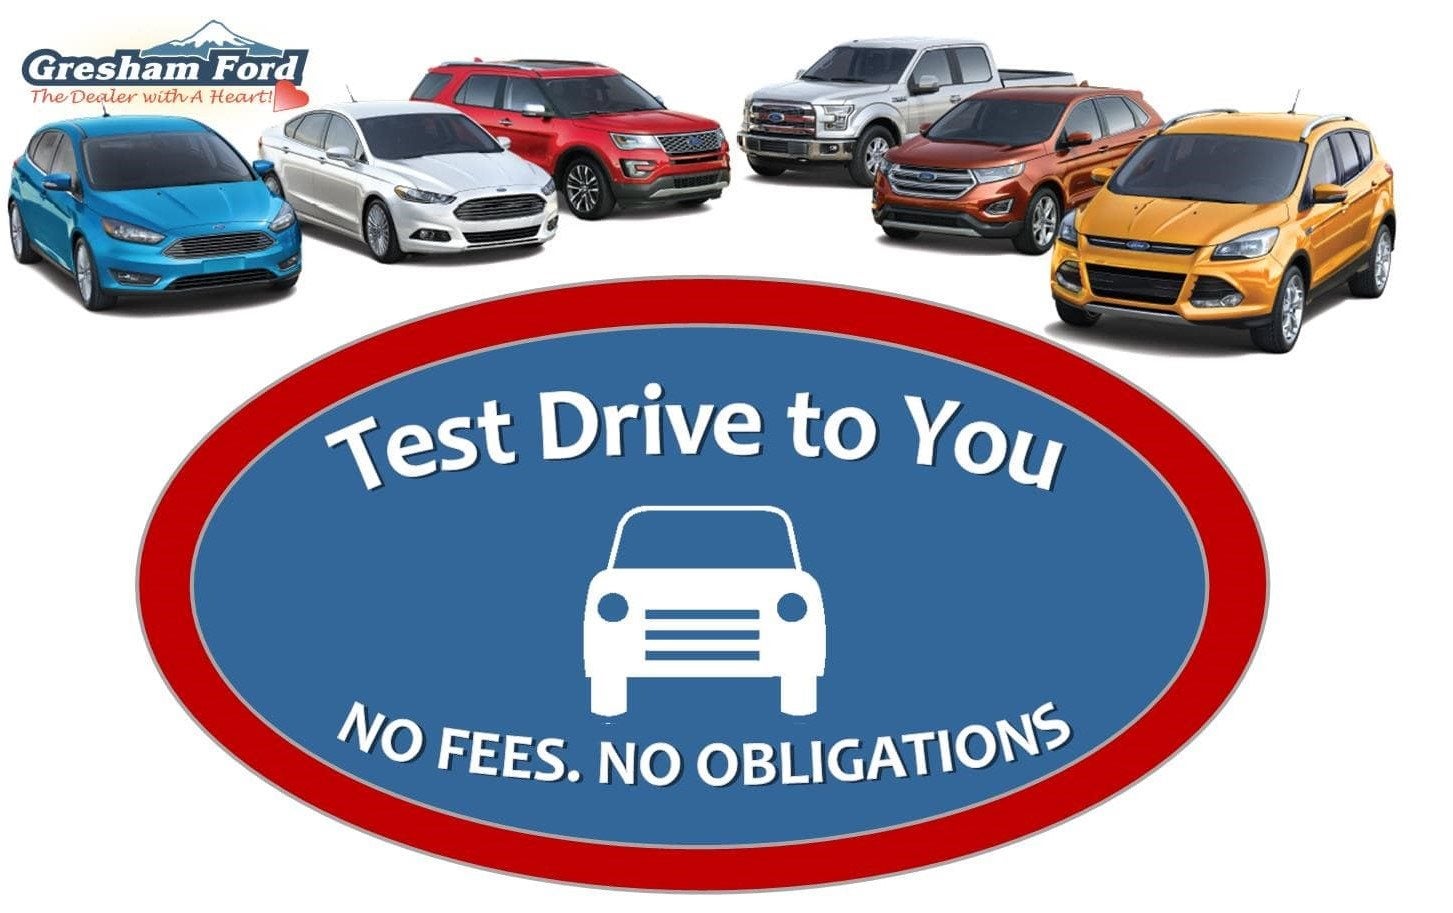 Gresham Ford Brings the Test Drive to You